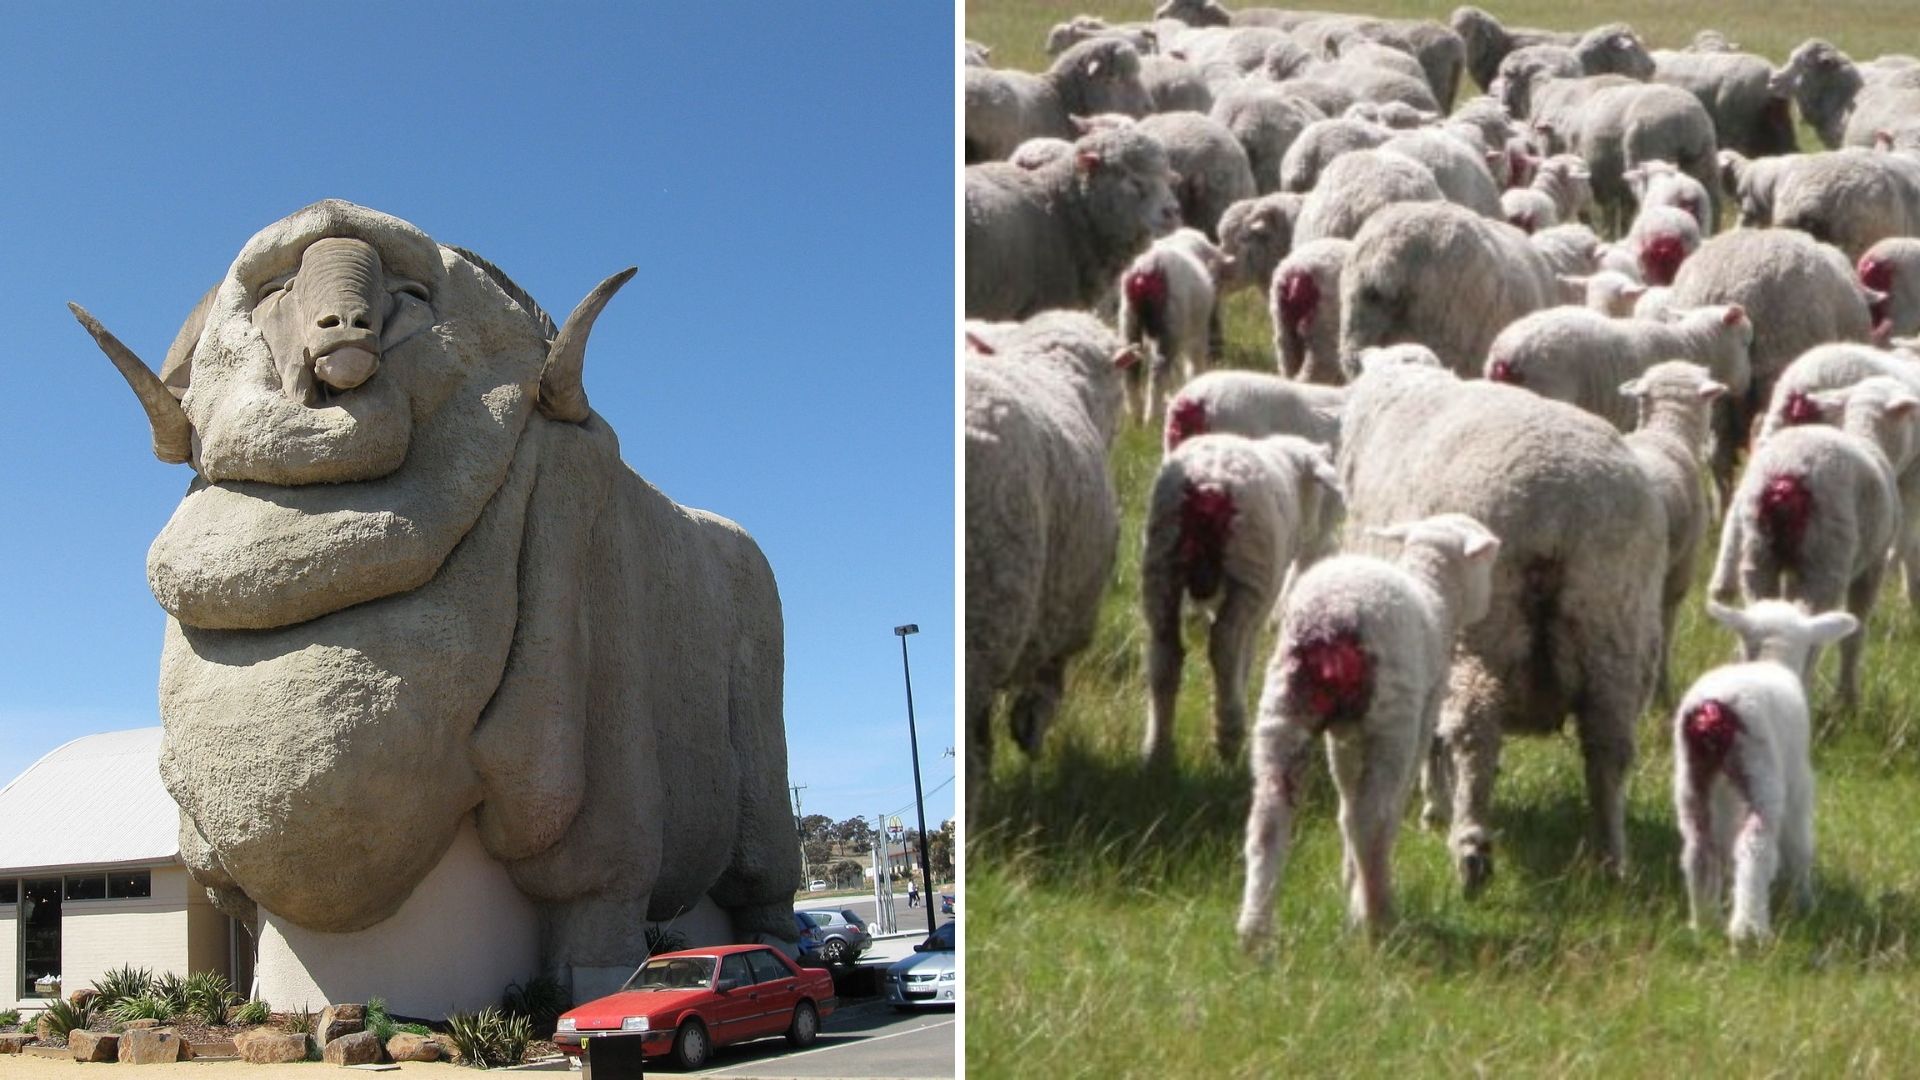 On the left: Goulburn's "Big Merino". On the right: an image of mulesed sheep. 